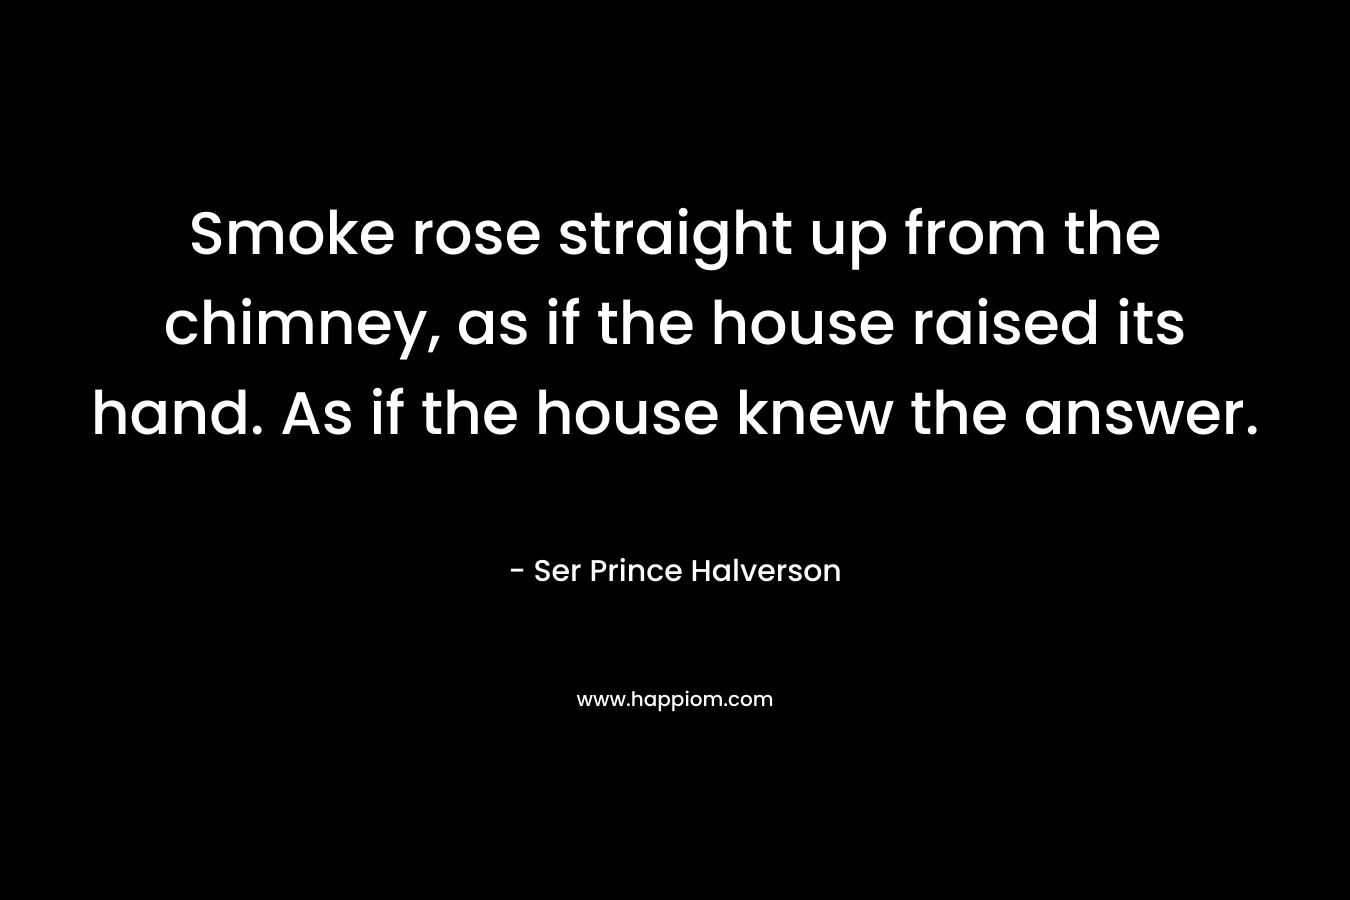 Smoke rose straight up from the chimney, as if the house raised its hand. As if the house knew the answer. – Ser Prince Halverson